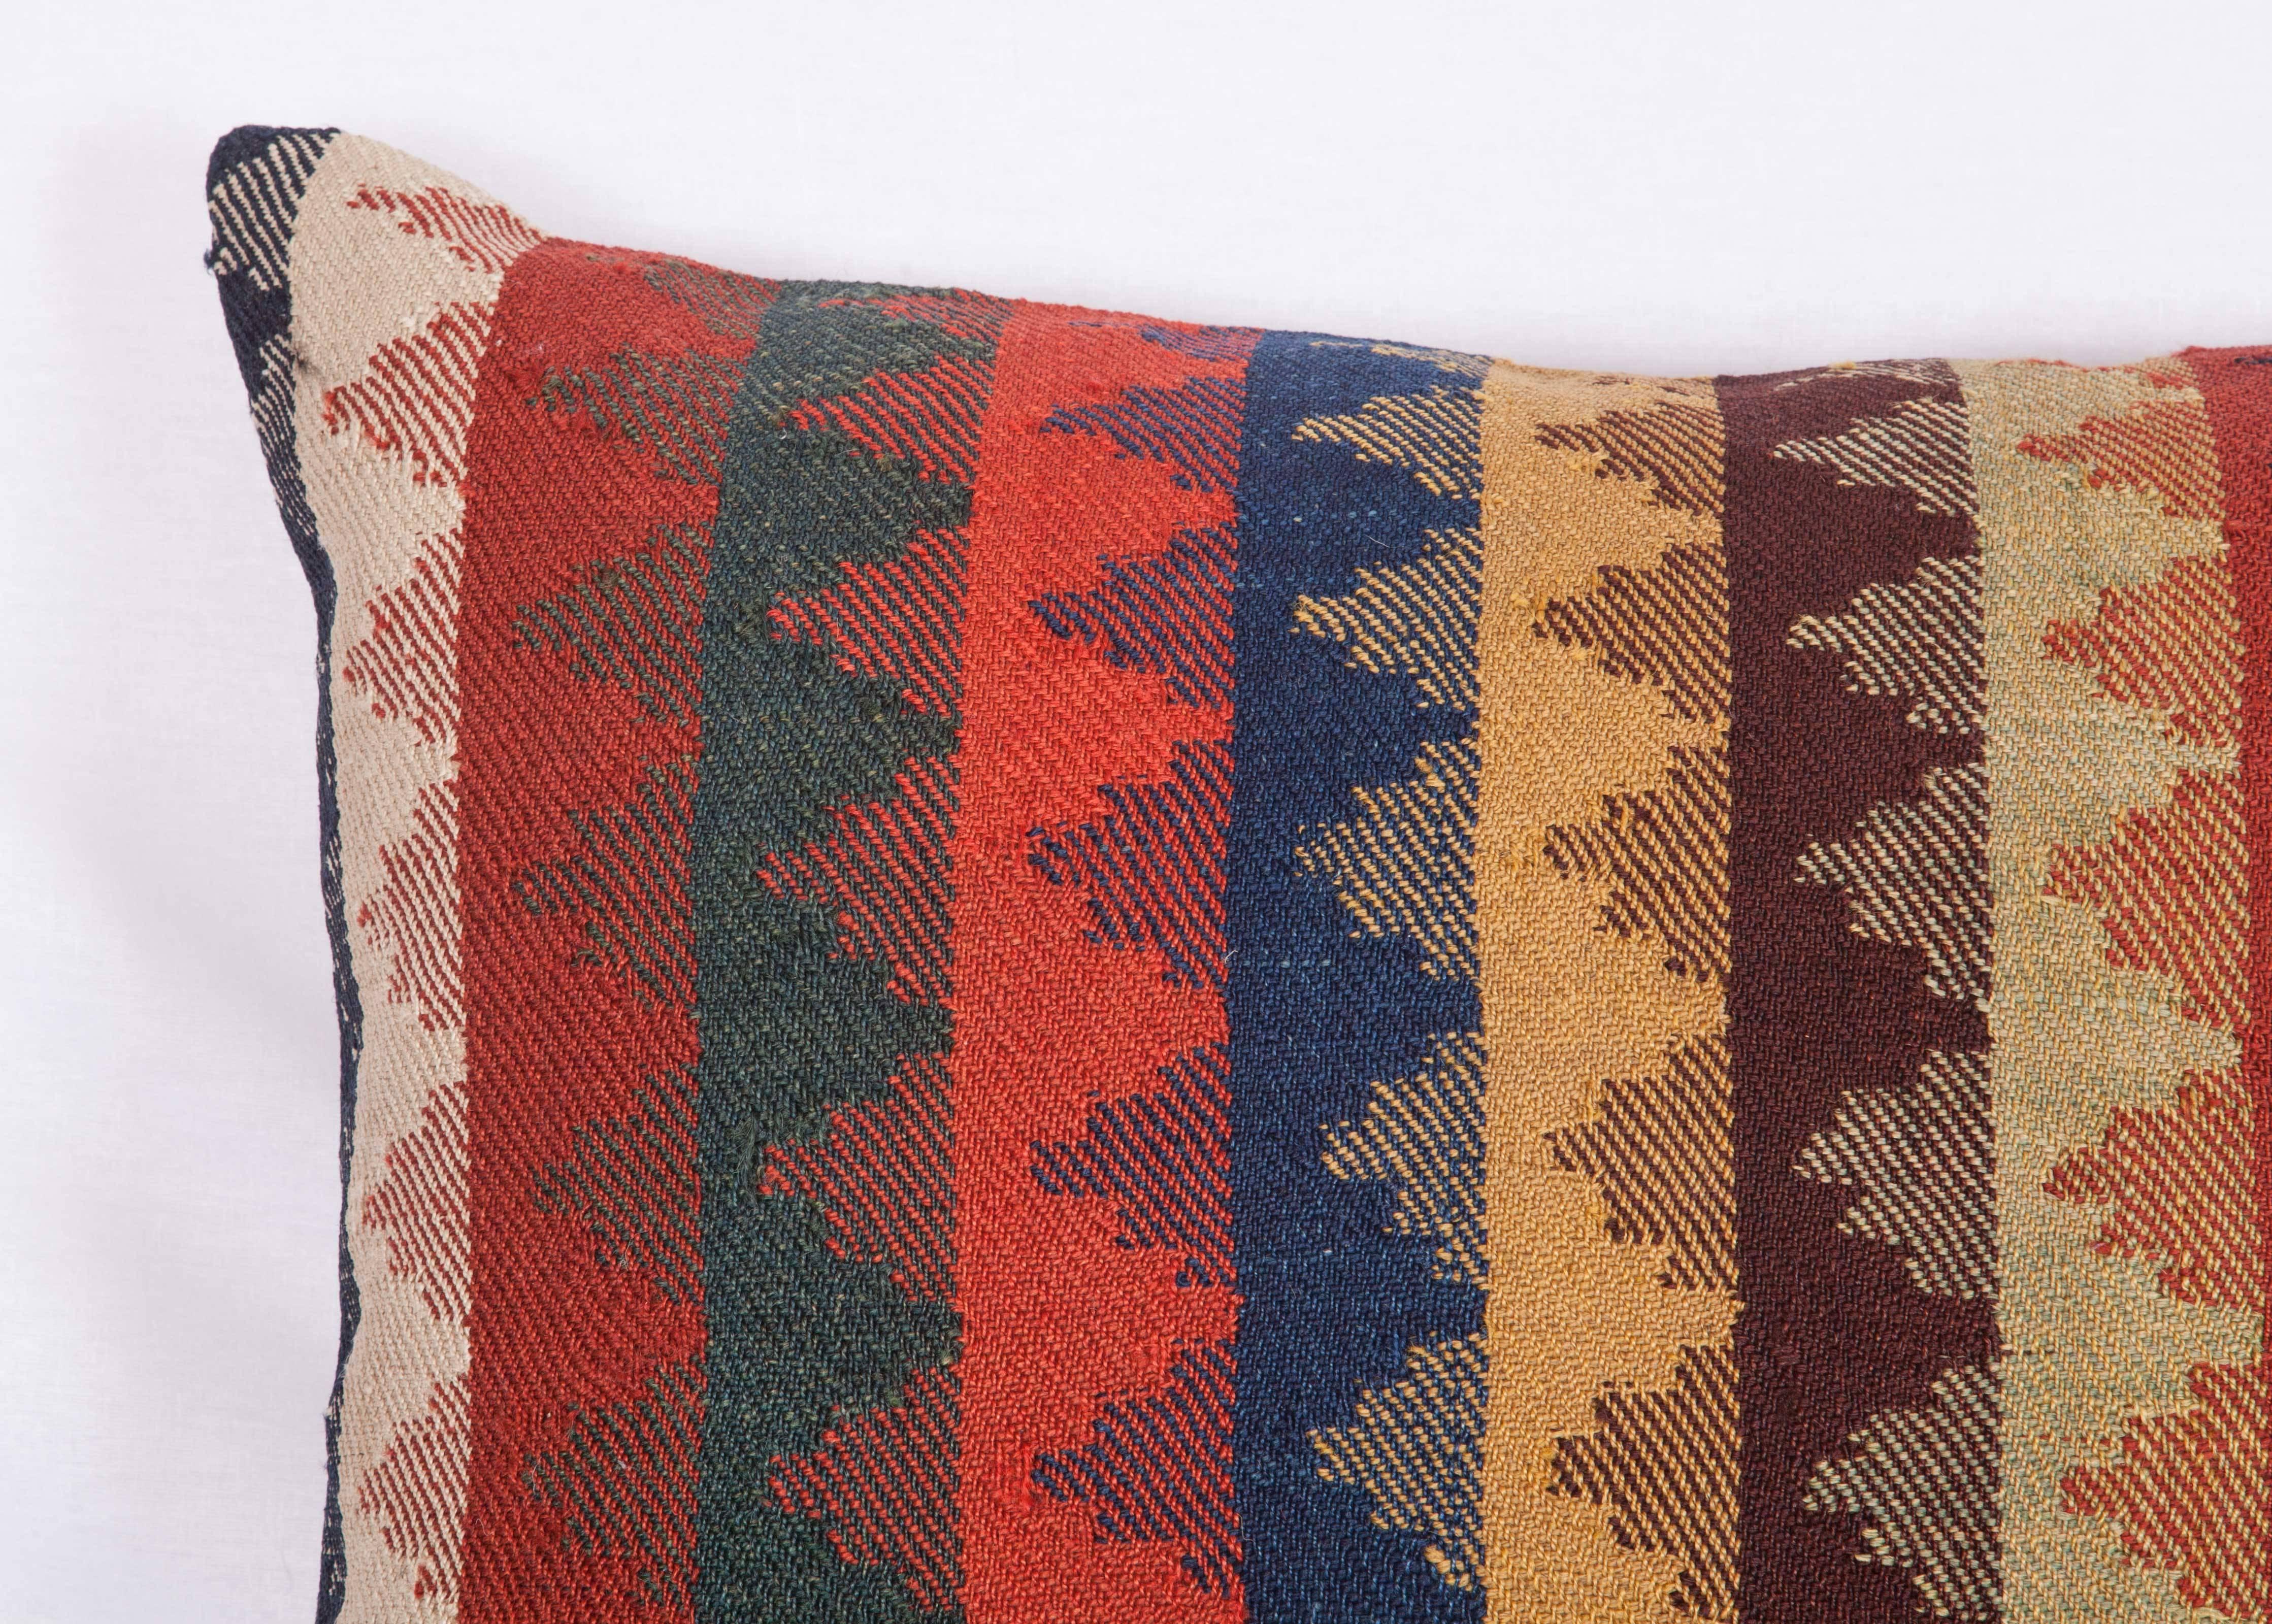 Pillow is made out of a late 19th century South Persian, Kashgai Kilim fragment. It does not come with an insert but it comes with a bag made to the size and out of cotton to accommodate the filling. The backing is made of linen. Please note filling